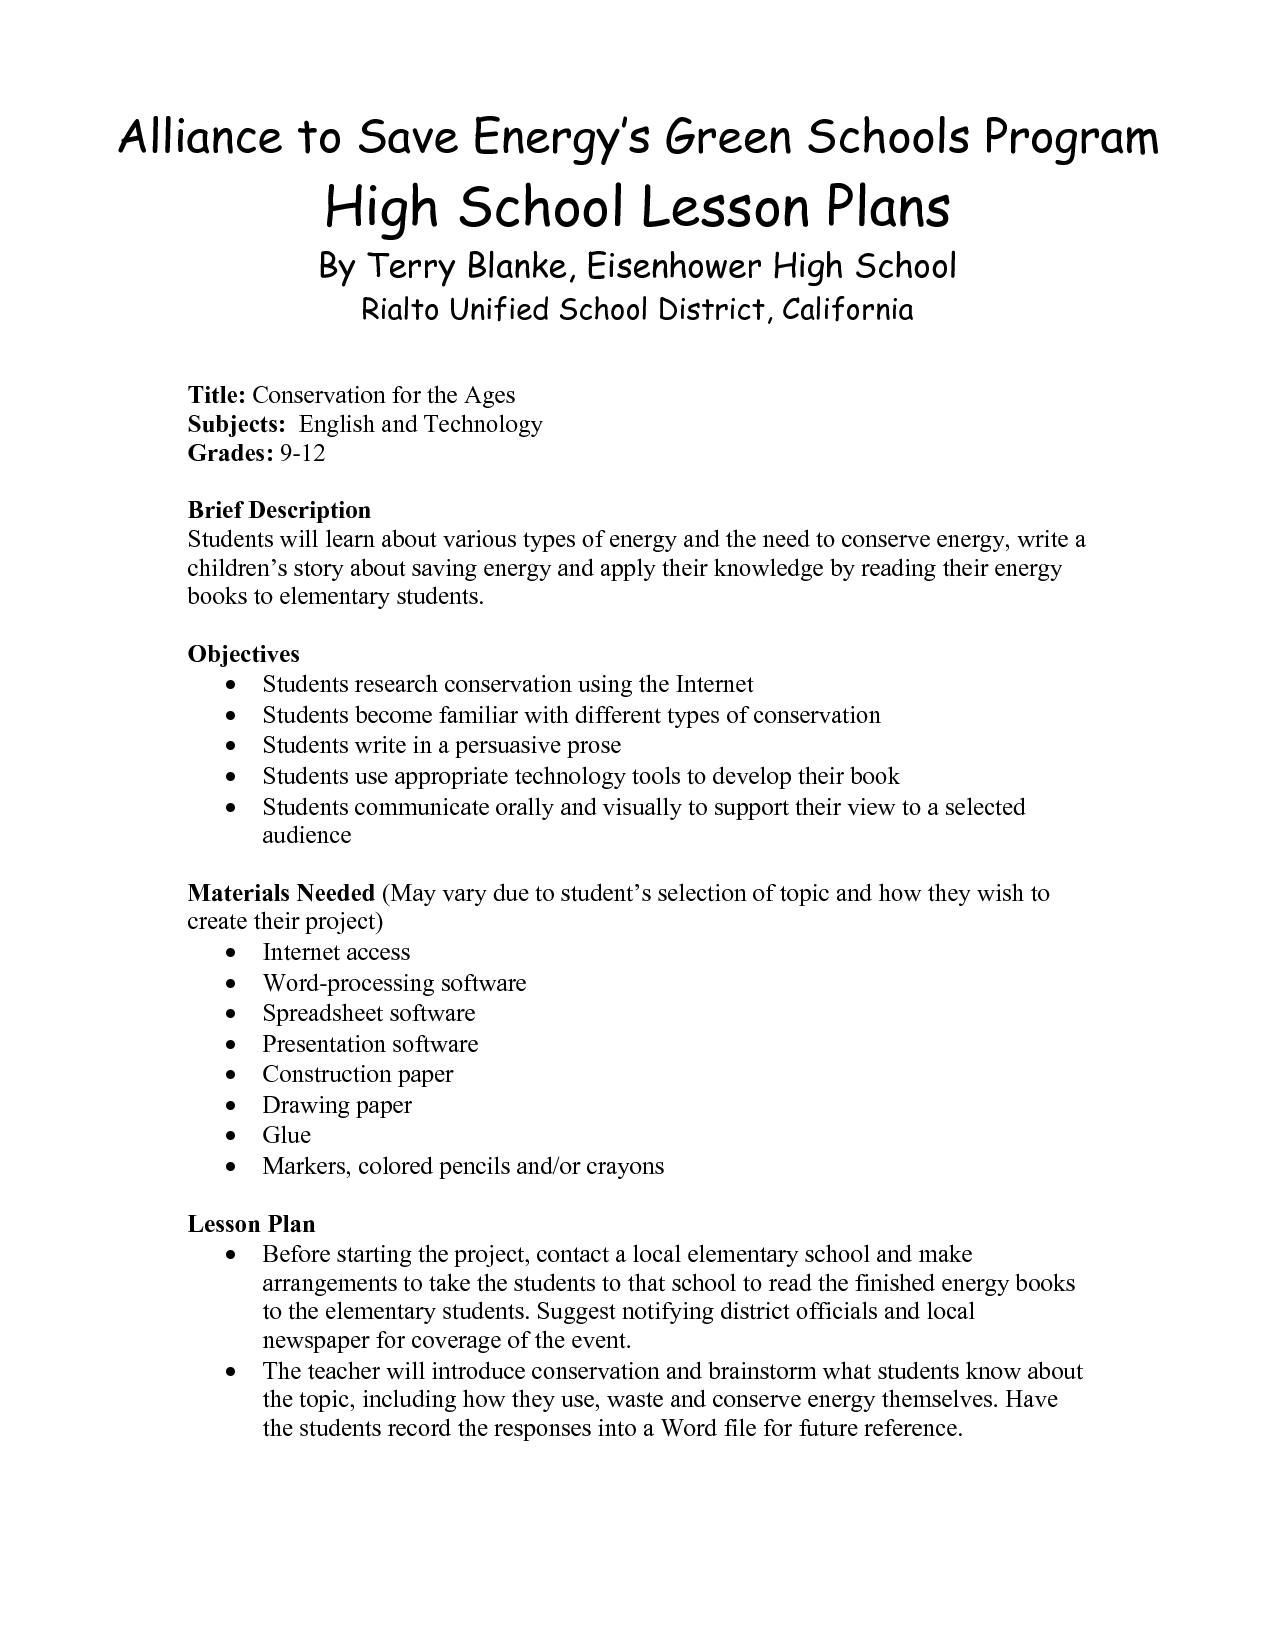 Writing a good college admissions essay lesson plans